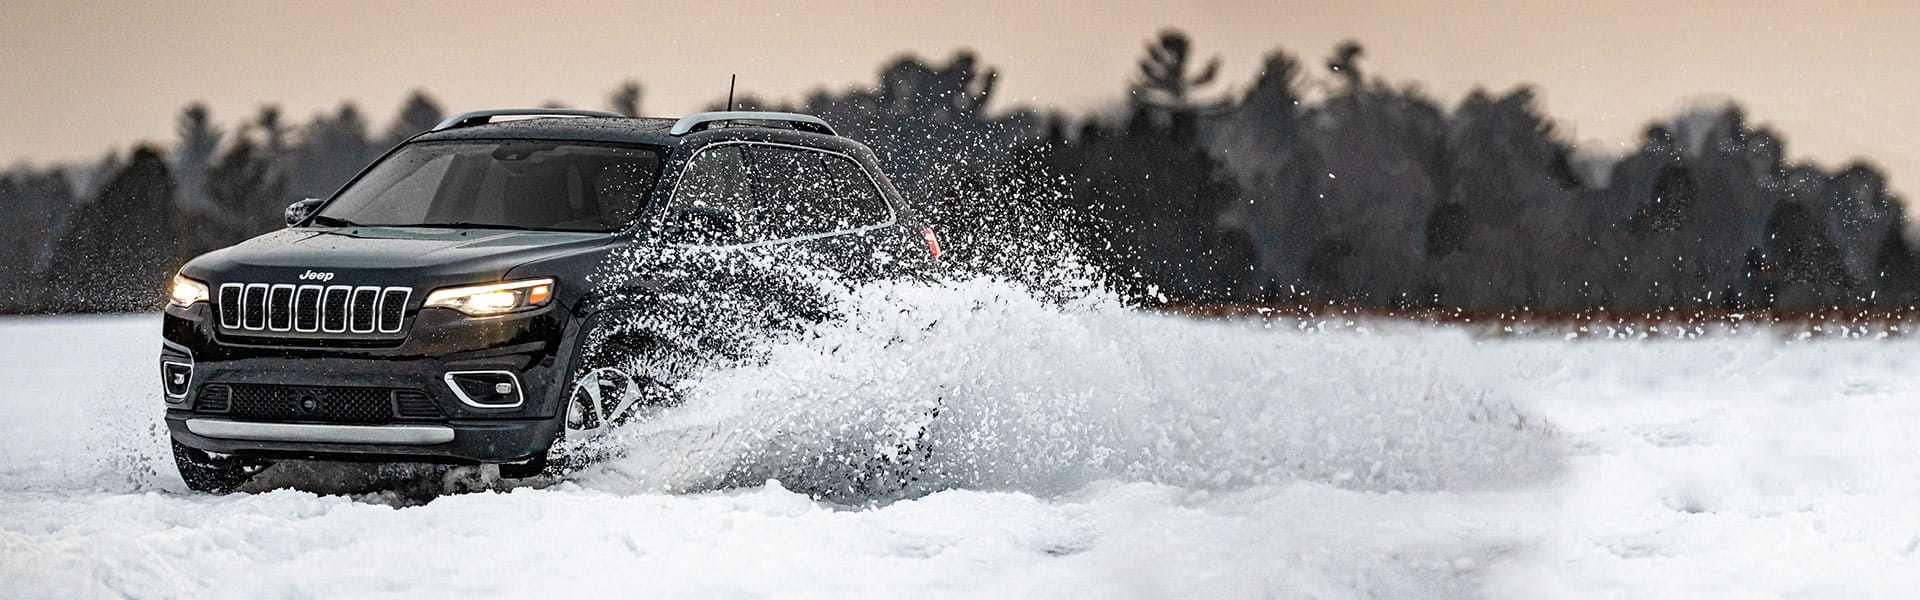 The 2021 Jeep Cherokee Limited being driven through snow, with a spray of loose snow coming from its wheels.